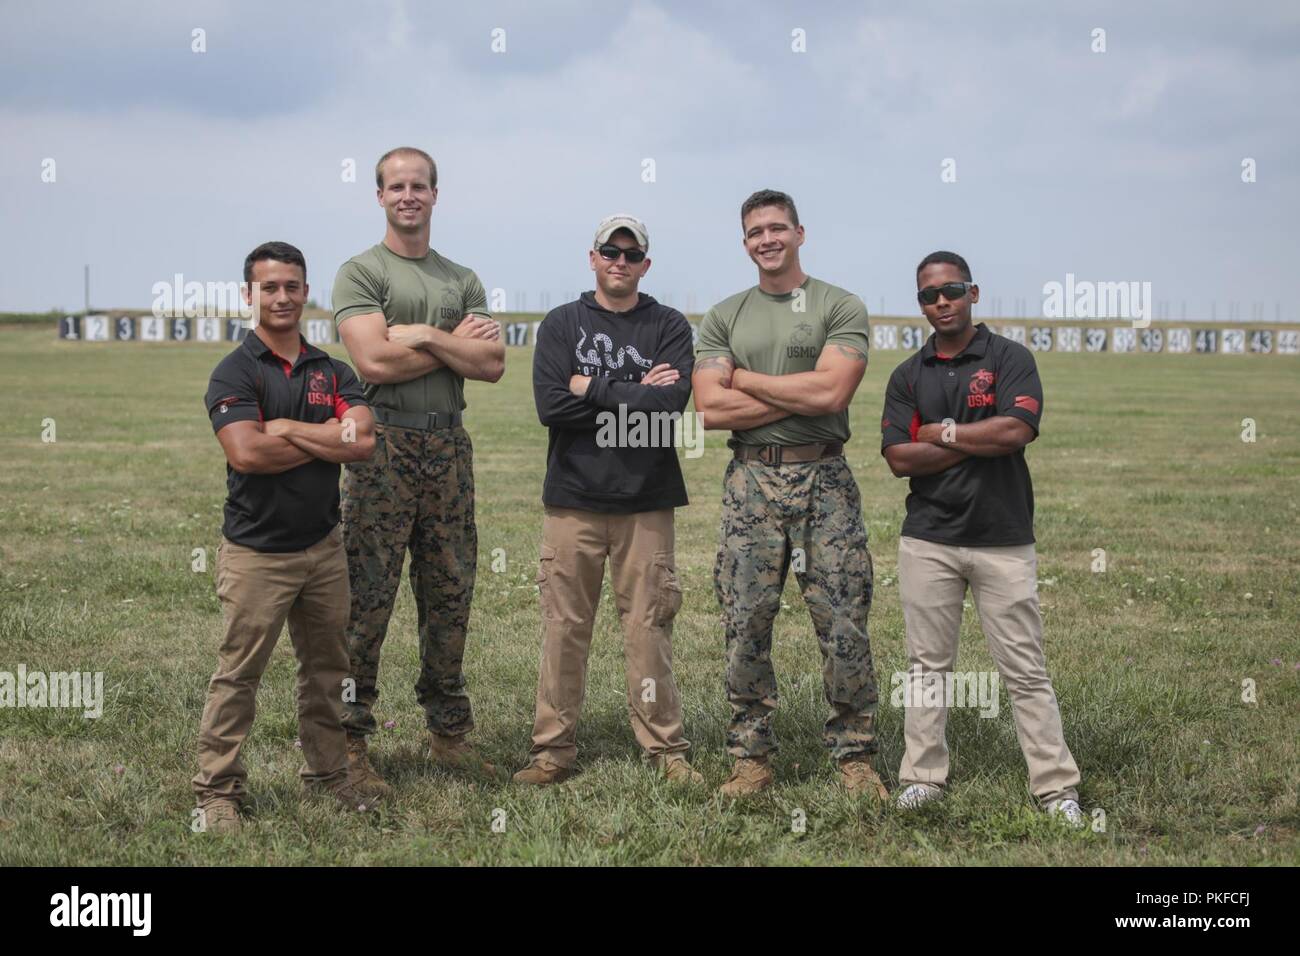 Marines from the MCRD Parris Island Shooting Team pose for a photo at Camp Perry, Ohio Aug. 1, 2018. The members are, from left to right, Sgt. Thomas Colyard, Cpl. Trevor Keith, GySgt. Josh Heckman, Sgt. Cody Cheney and Cpl. Victor Irizarry. The Marines were at Camp Perry for the Civilian Marksmanship Program National Matches July 23 through Aug. 5. The National Trophy Rifle Matches are an annual sporting festival established by congress and President Roosevelt in 1903. The event welcomes over 6,000 participants, ranging from beginning shooters to the world’s top-performing competitors. Shoote Stock Photo